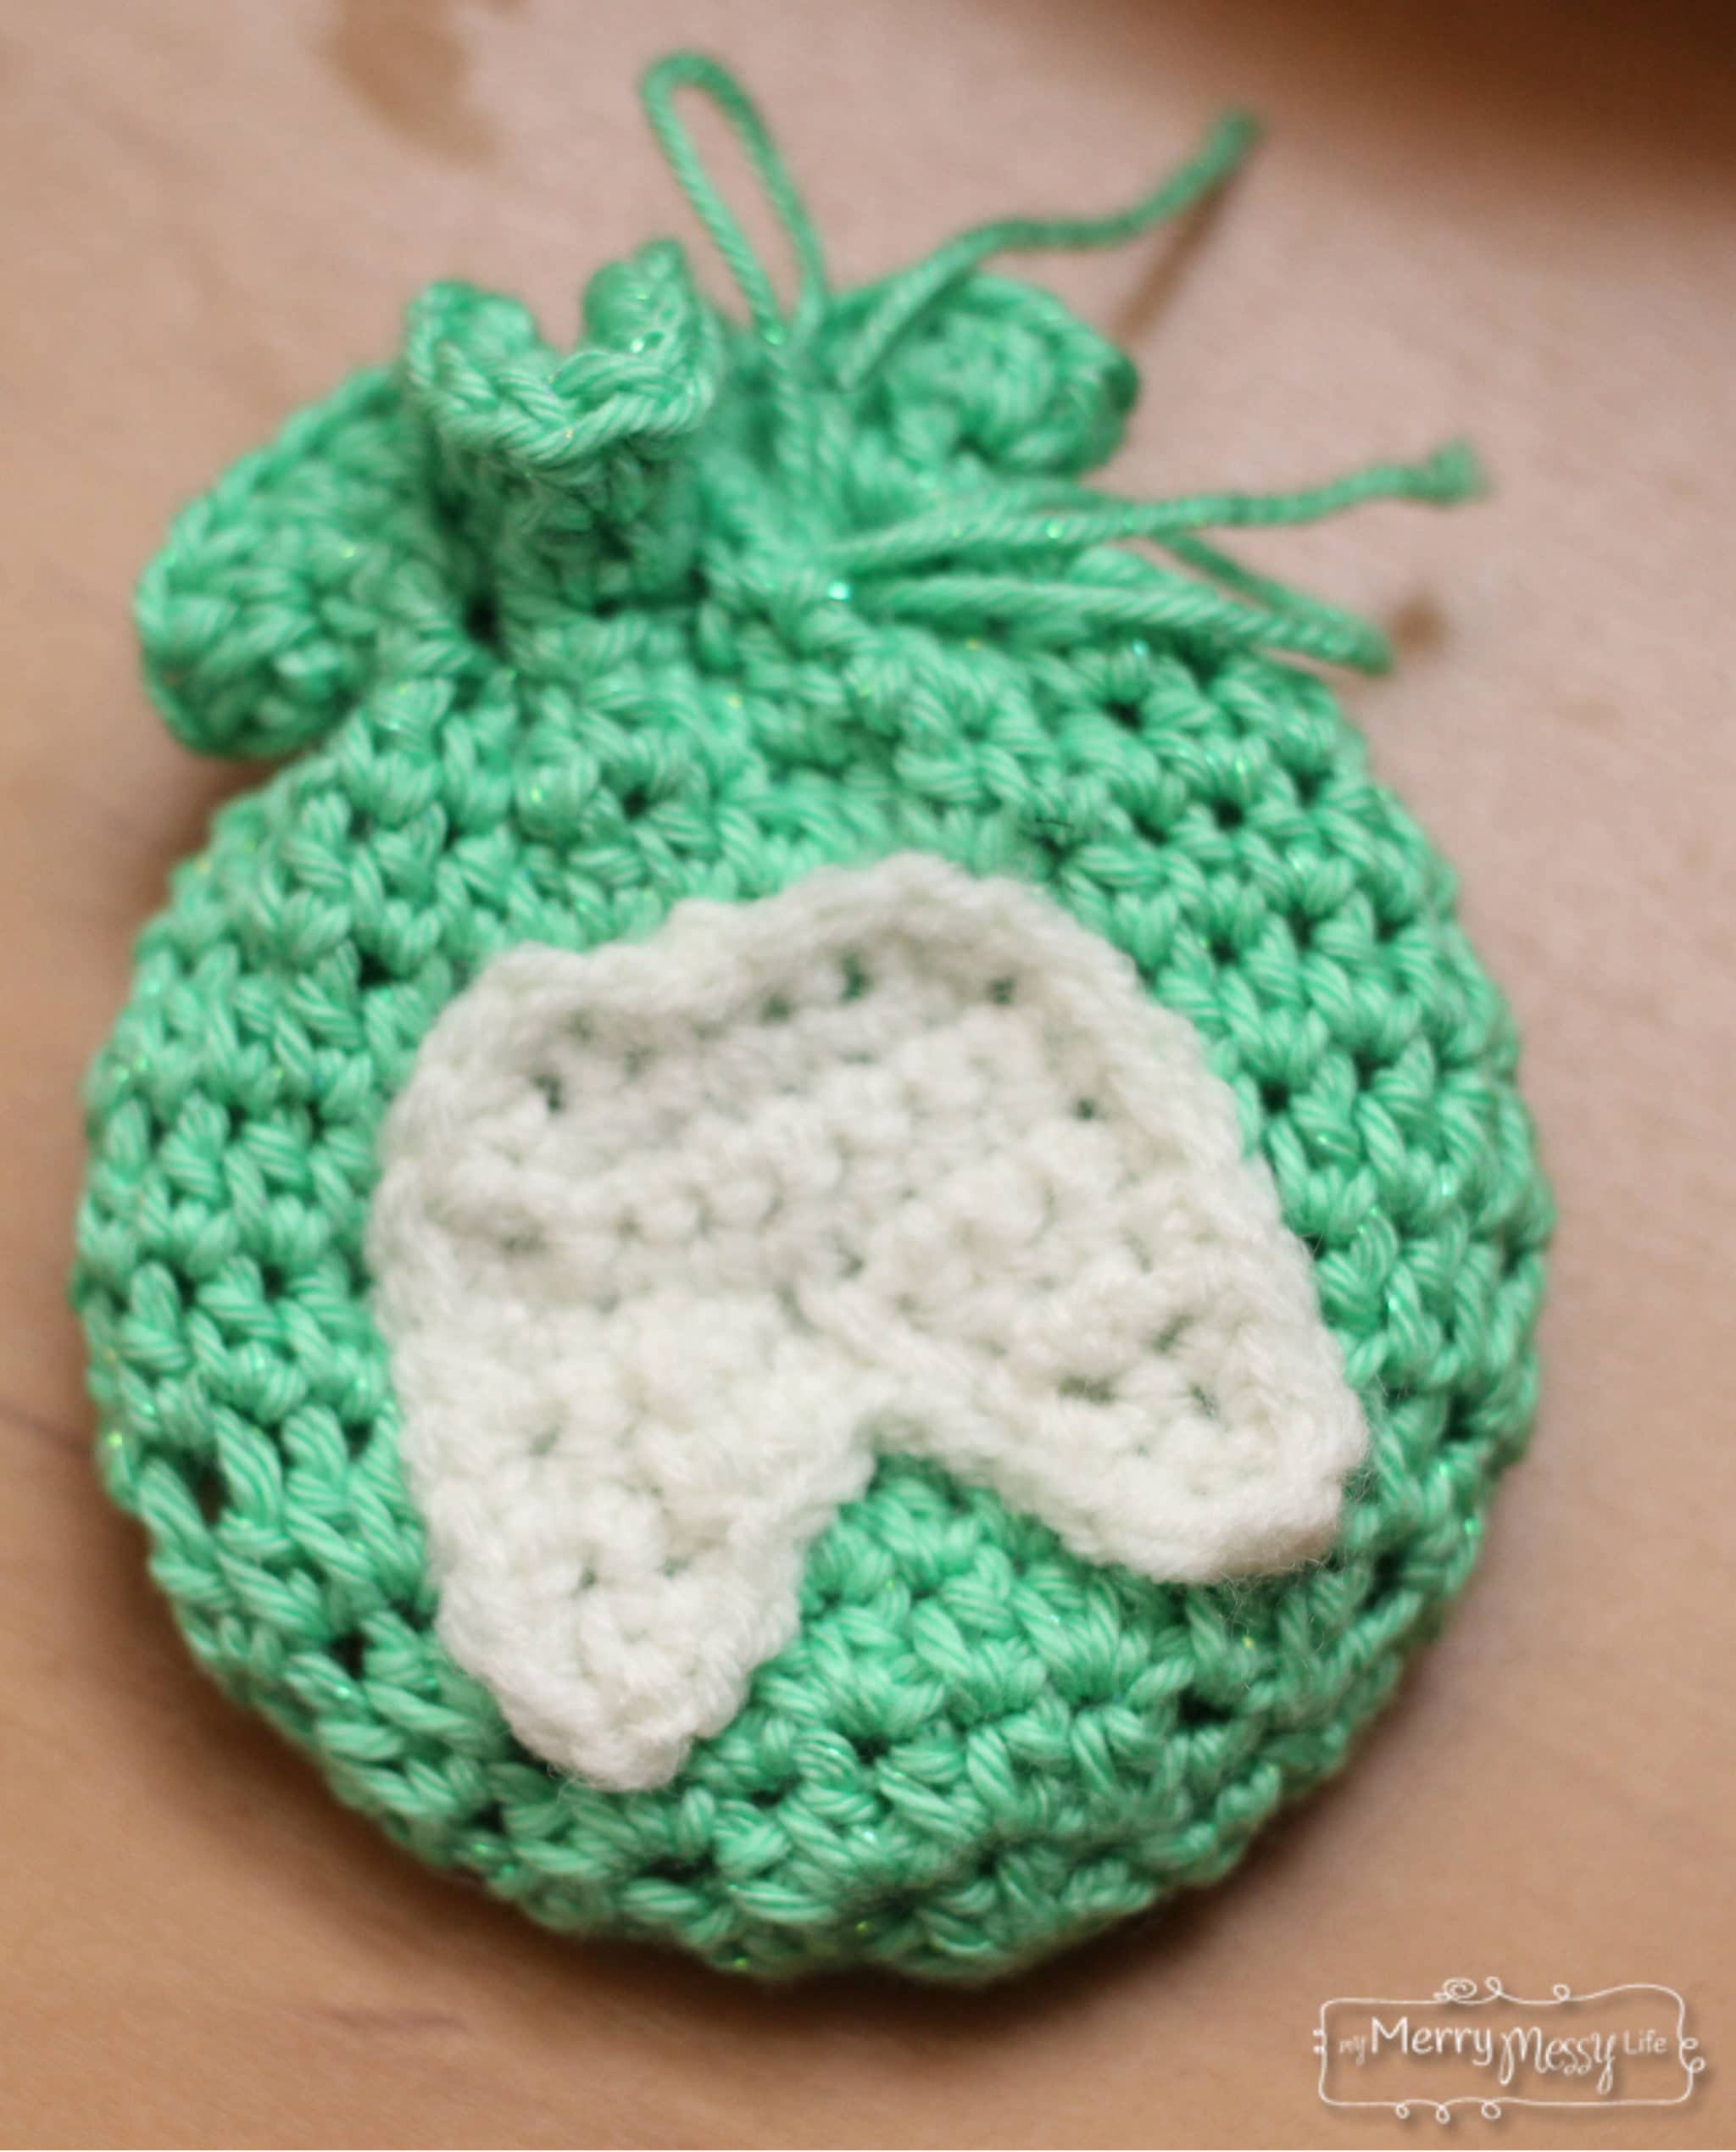 FREE Tooth Fairy Bag Crochet Pattern- the perfect keepsake to remember this precious time!